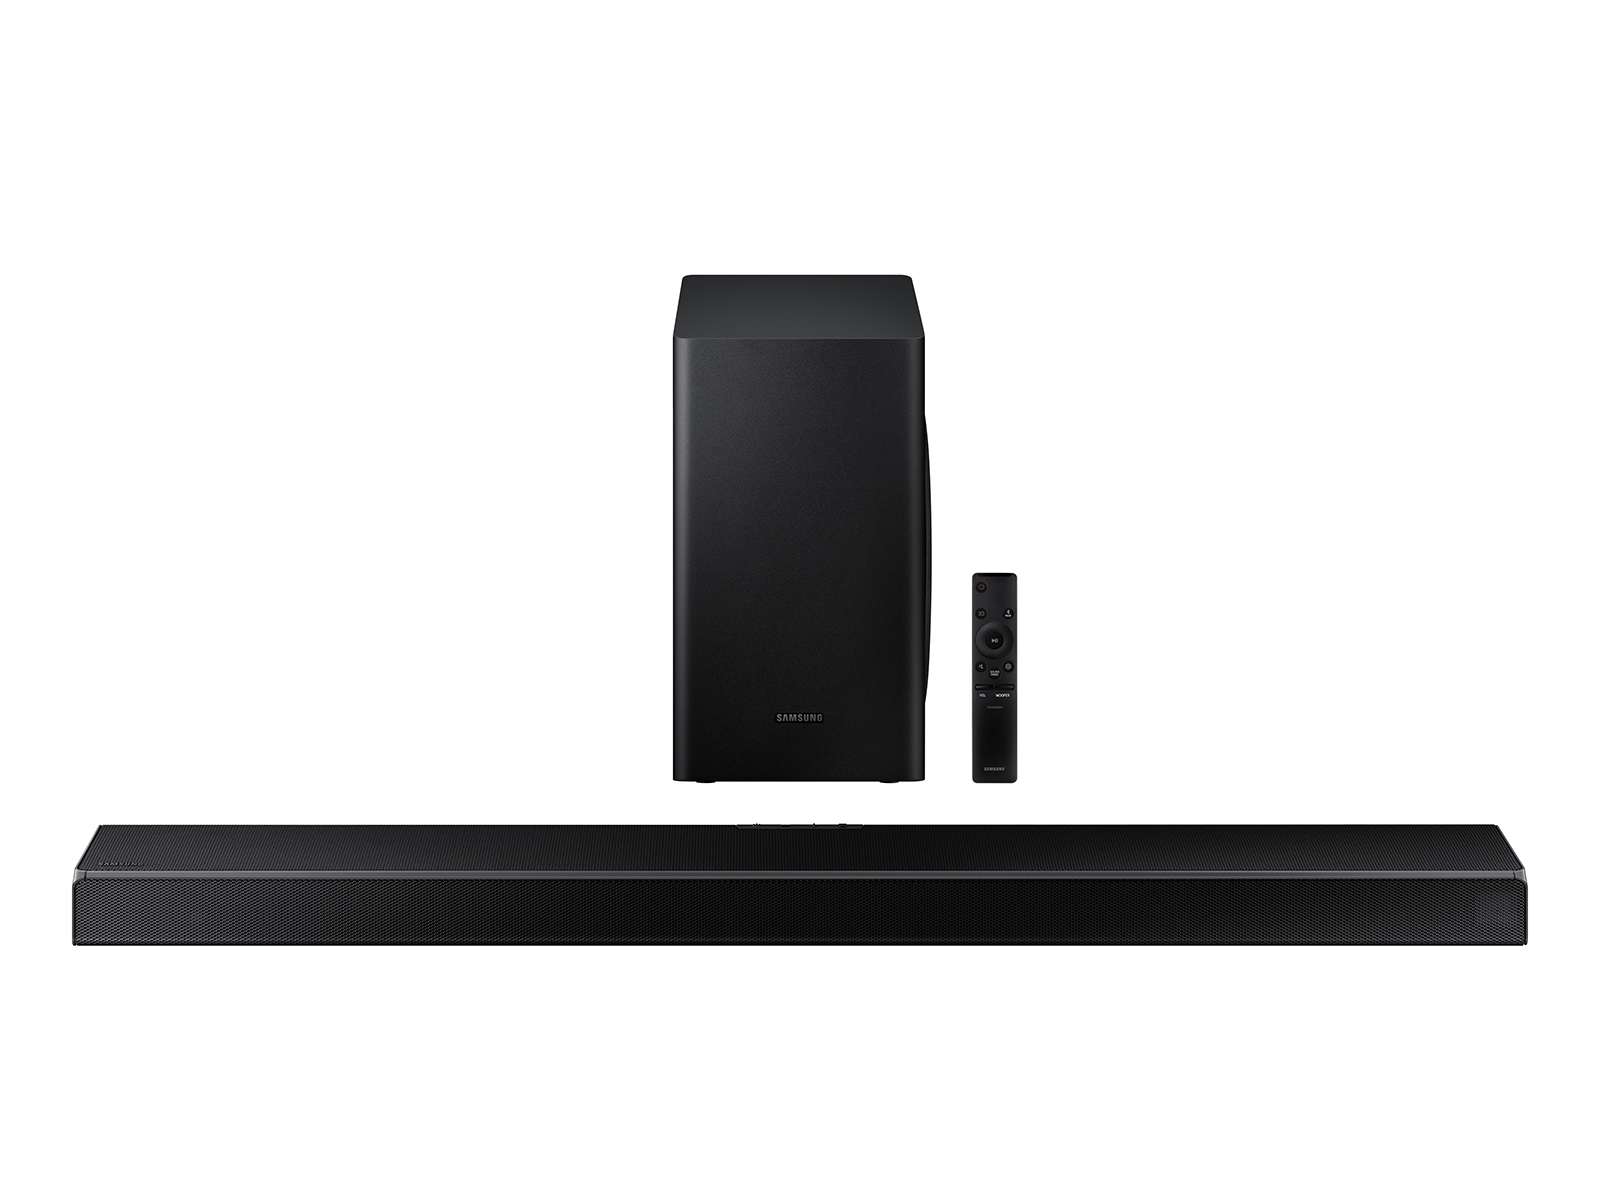 Step 2: Press and hold the power button on the soundbar